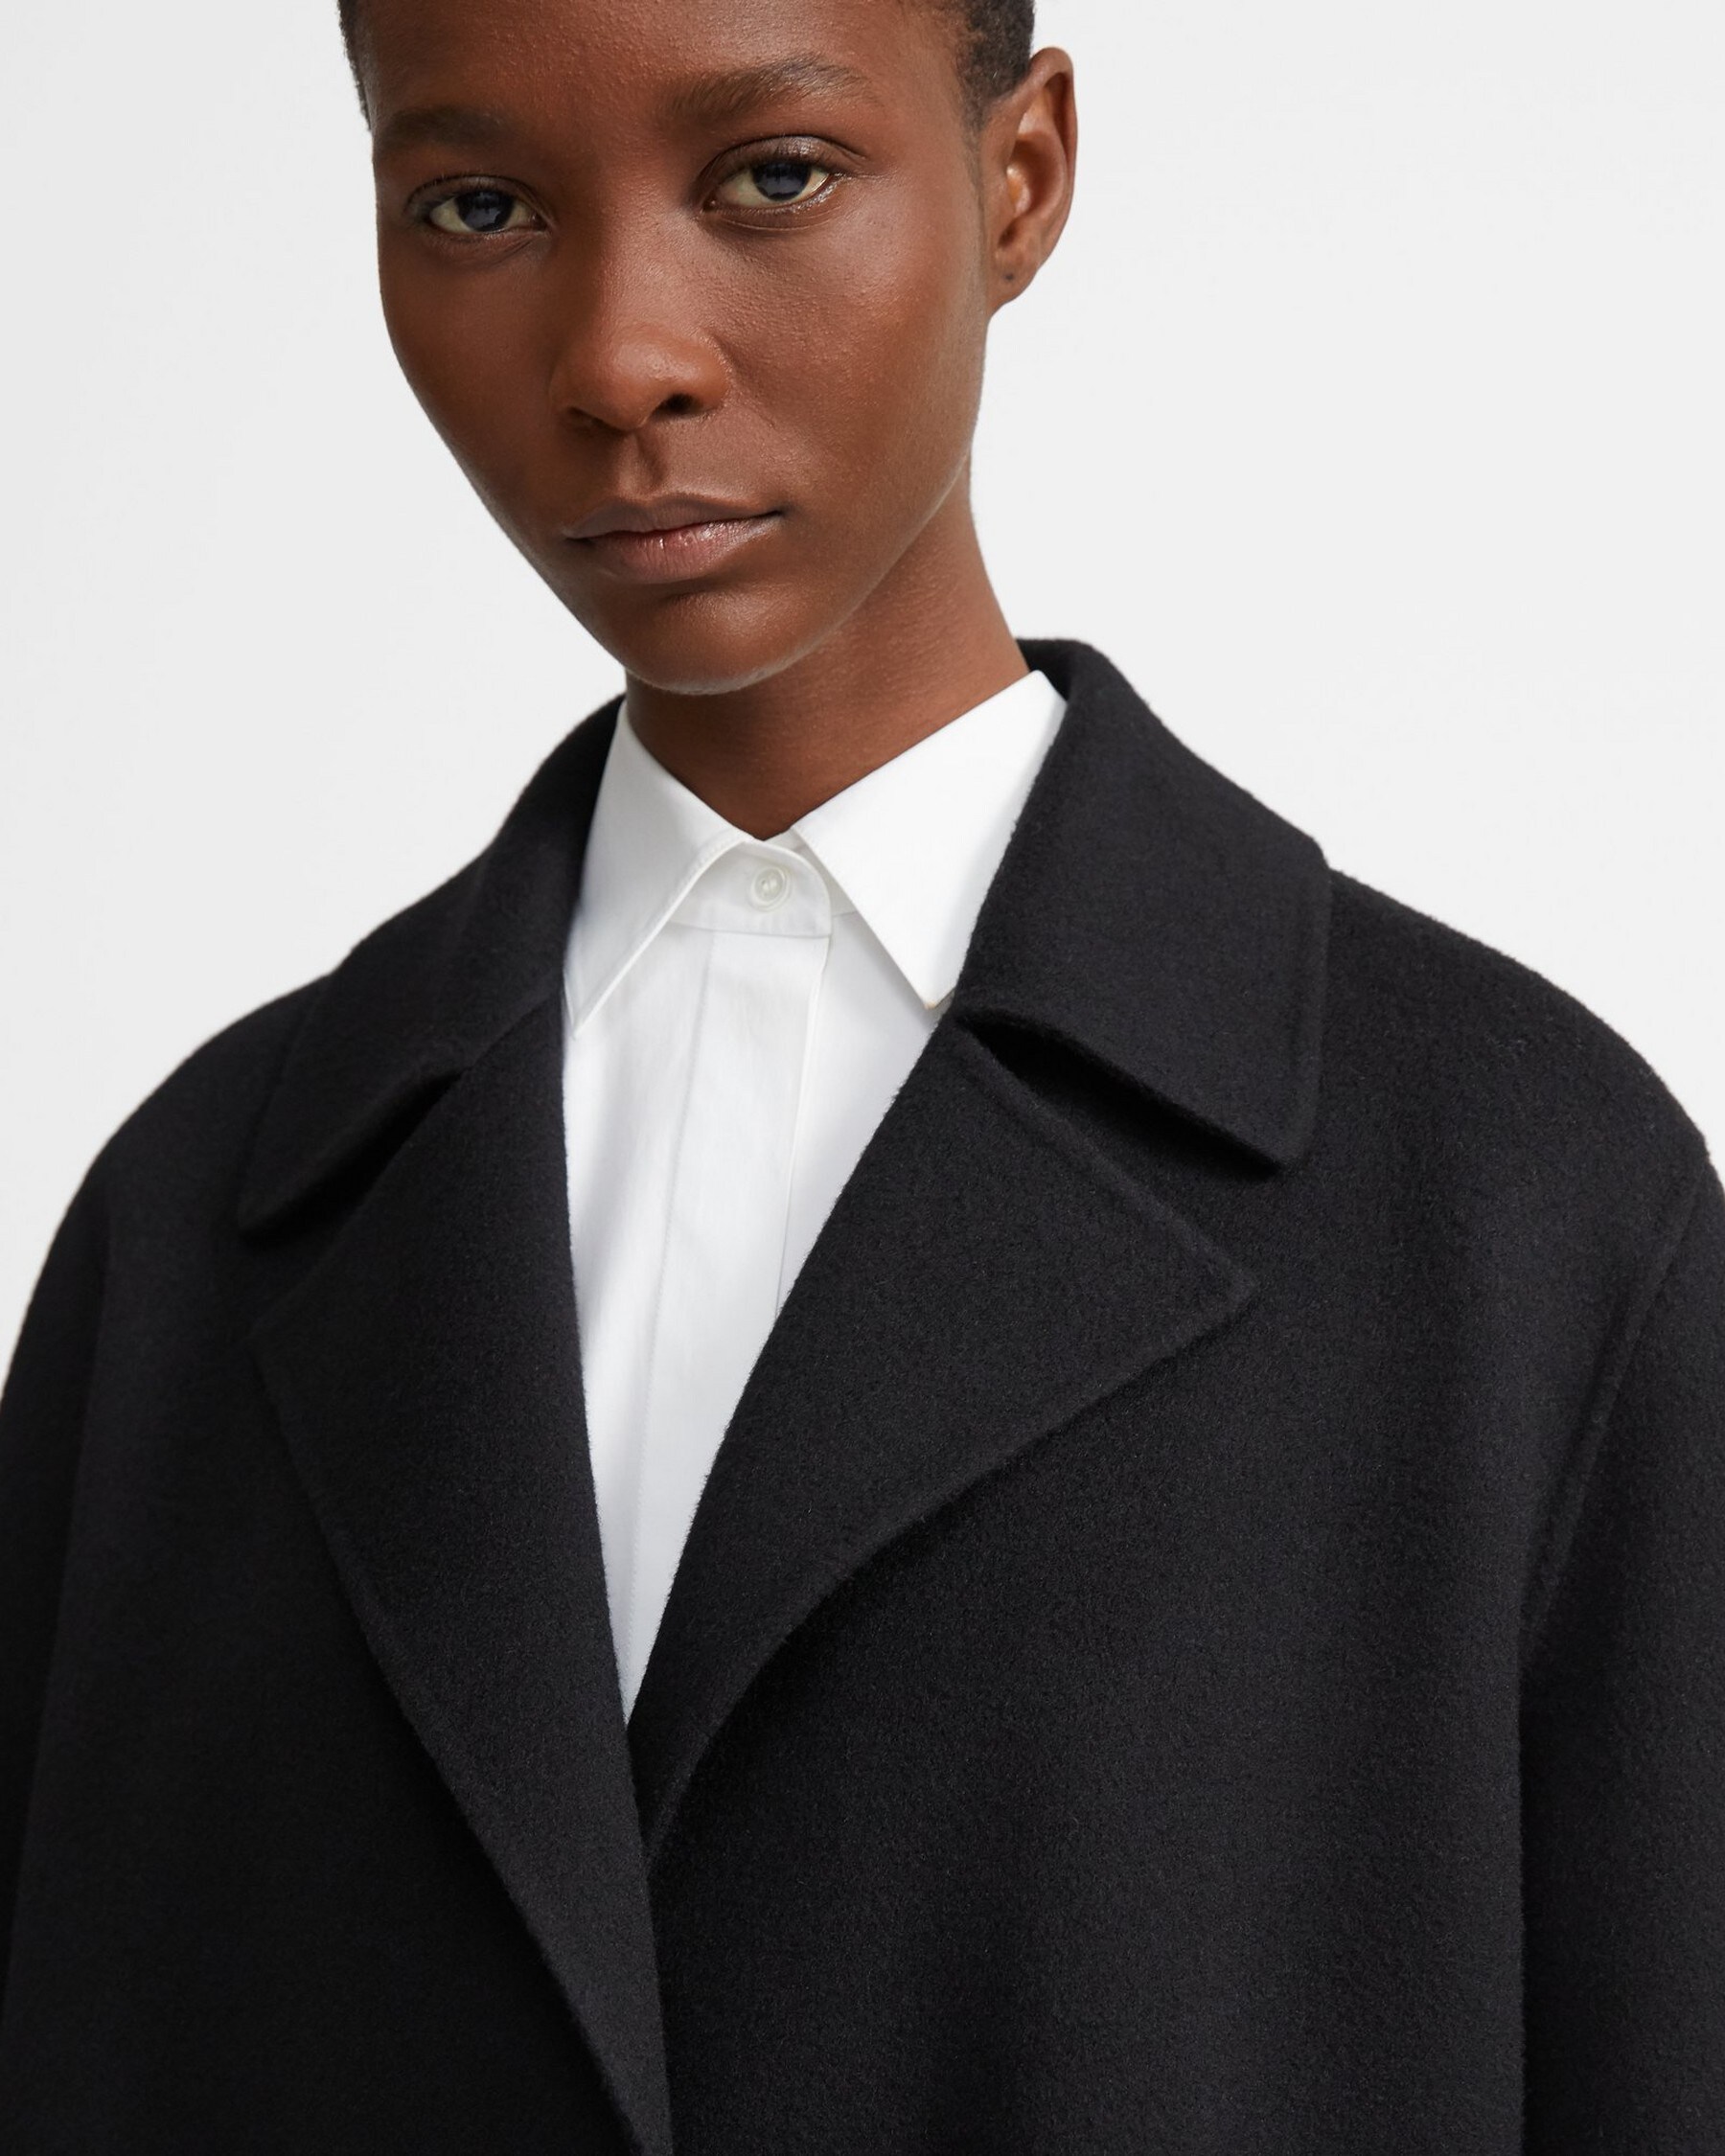 Overlay Coat in Double-Face Wool-Cashmere